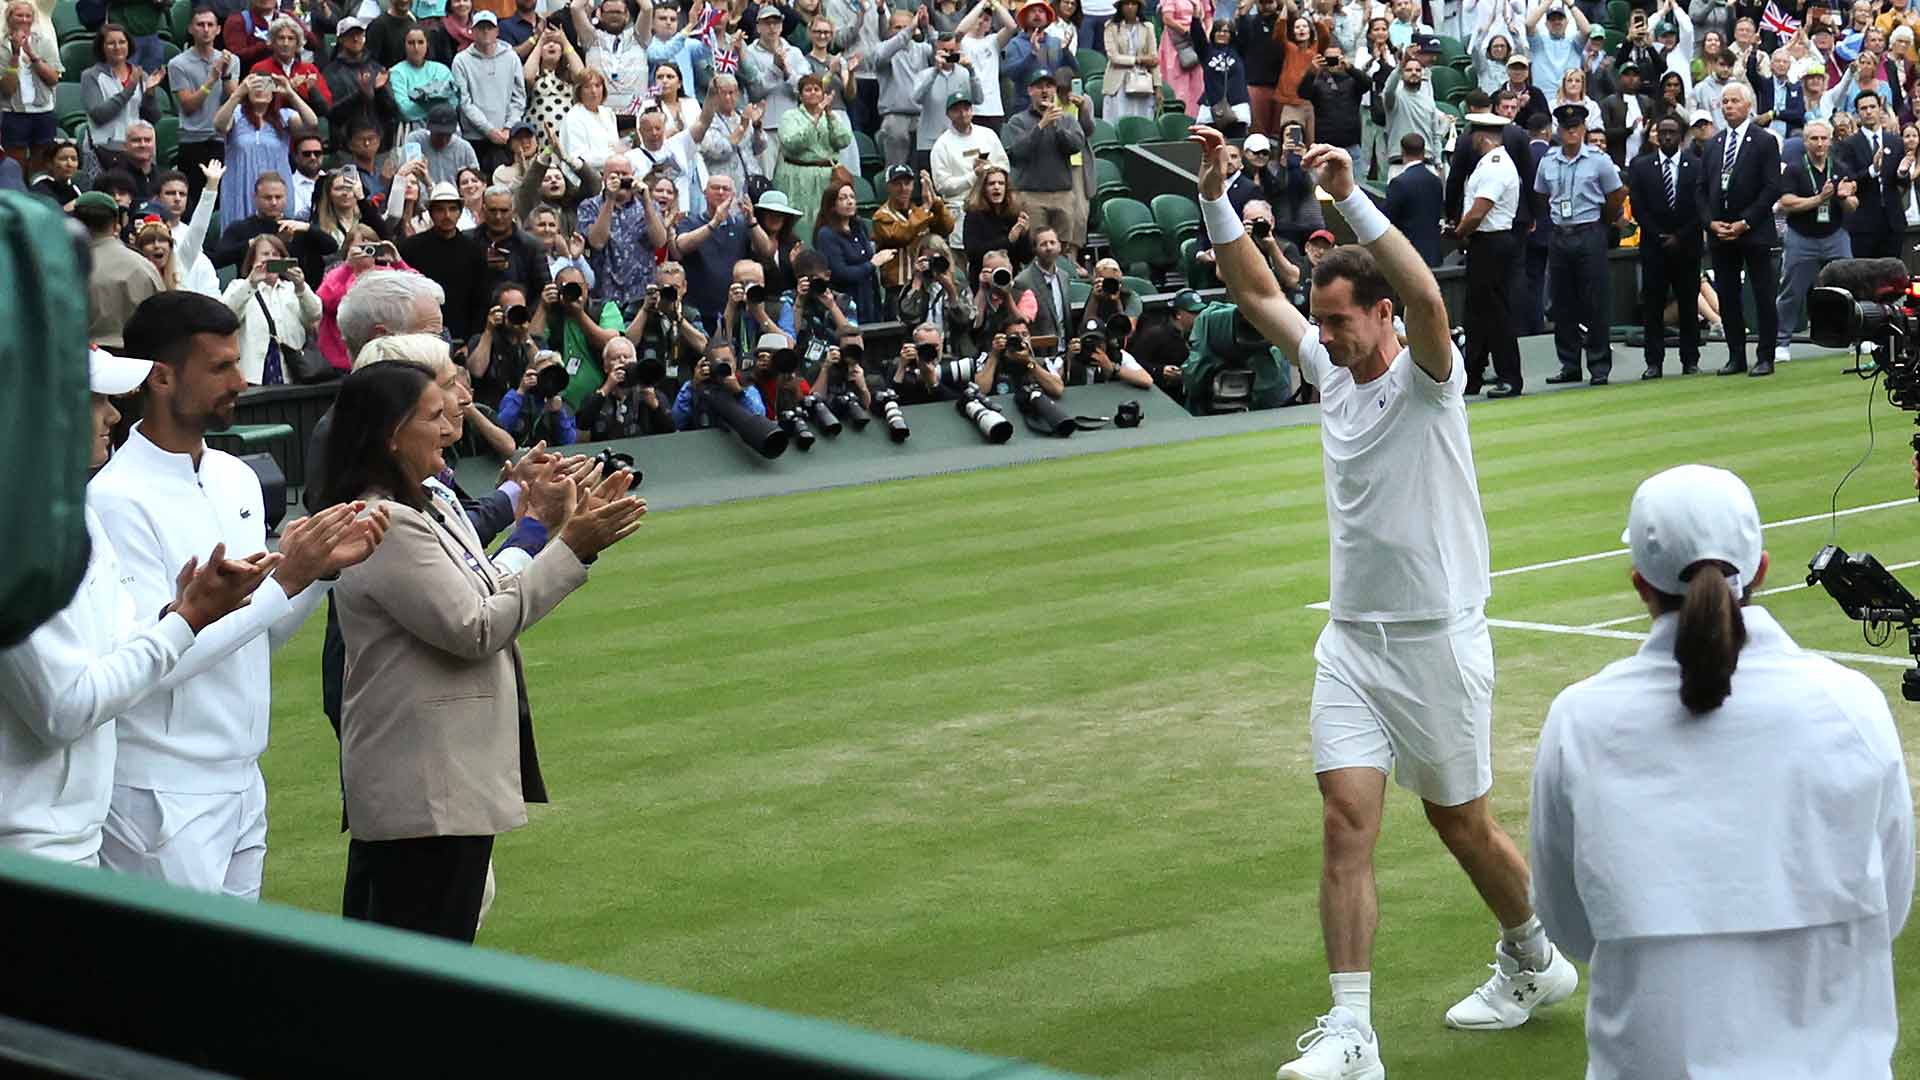 Andy Murray says farewell to adoring fans on Centre Court.